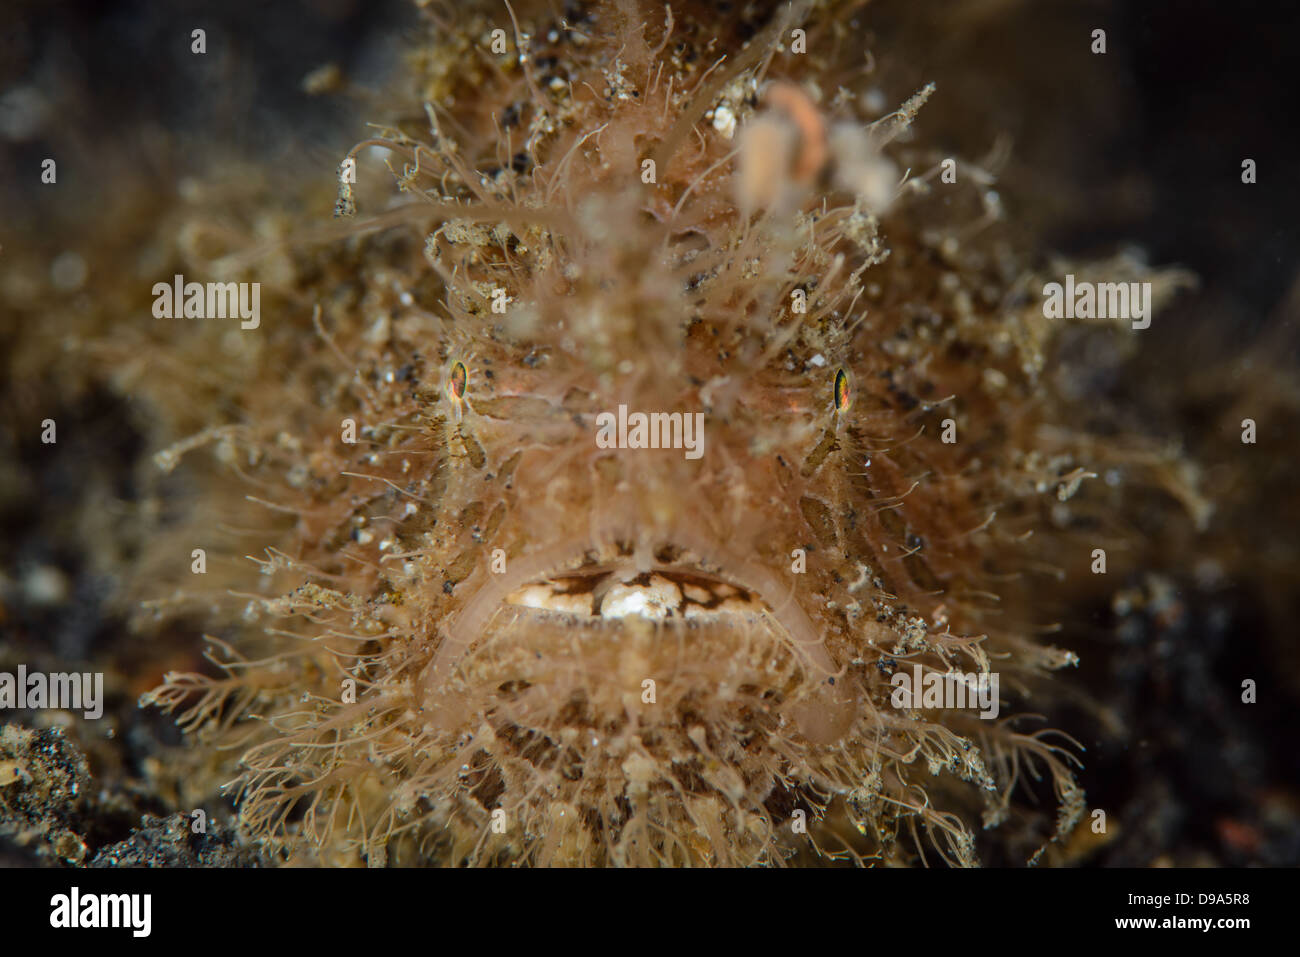 The portrait of a hairy frogfish also known as striated frogfish. Picture taken in the Lembeh Strait, North Sulawesi Stock Photo